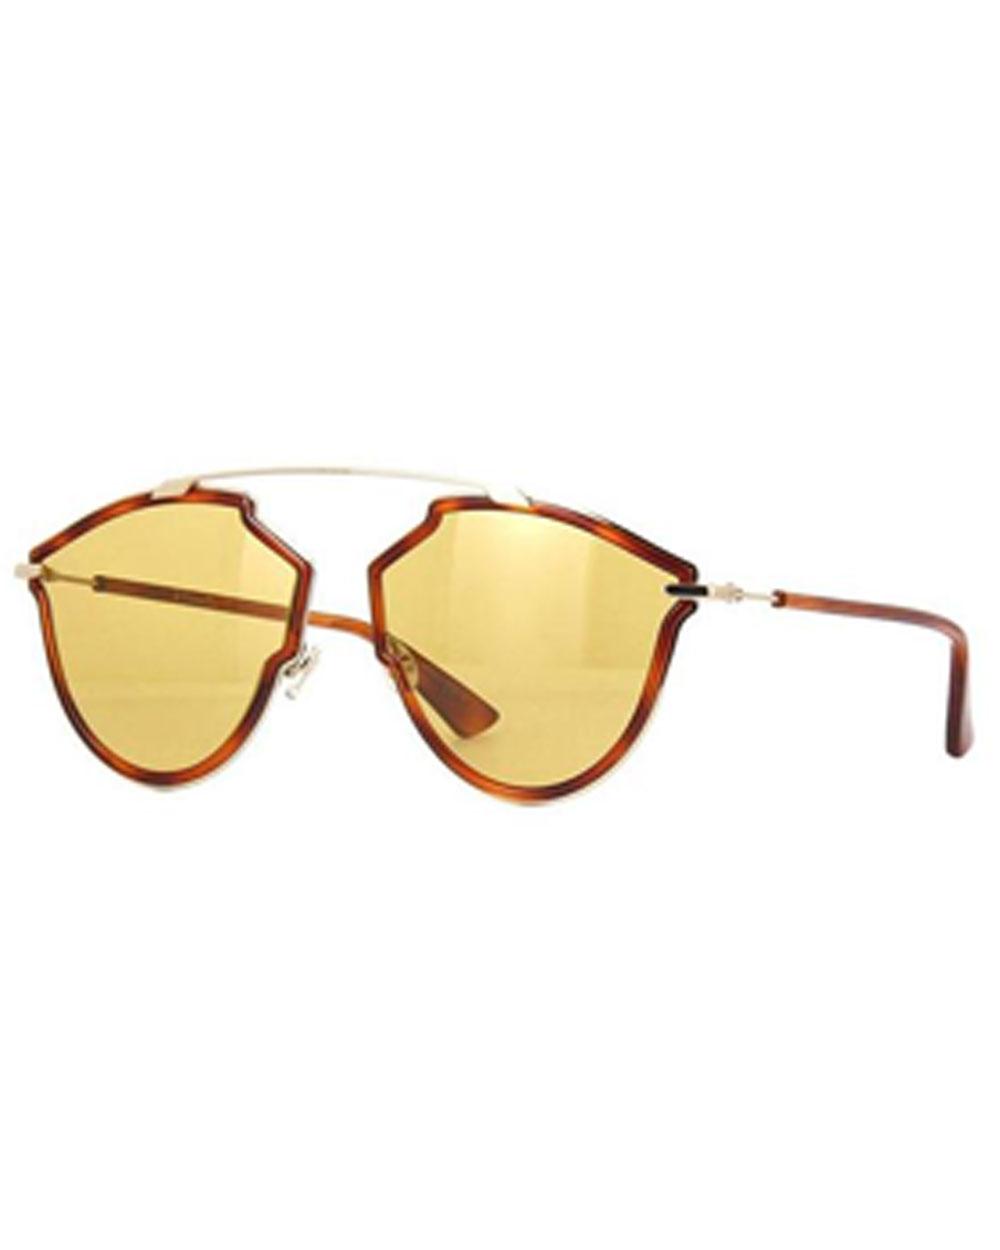 Dior So Real Rise Sunglasses in Brown - Lyst